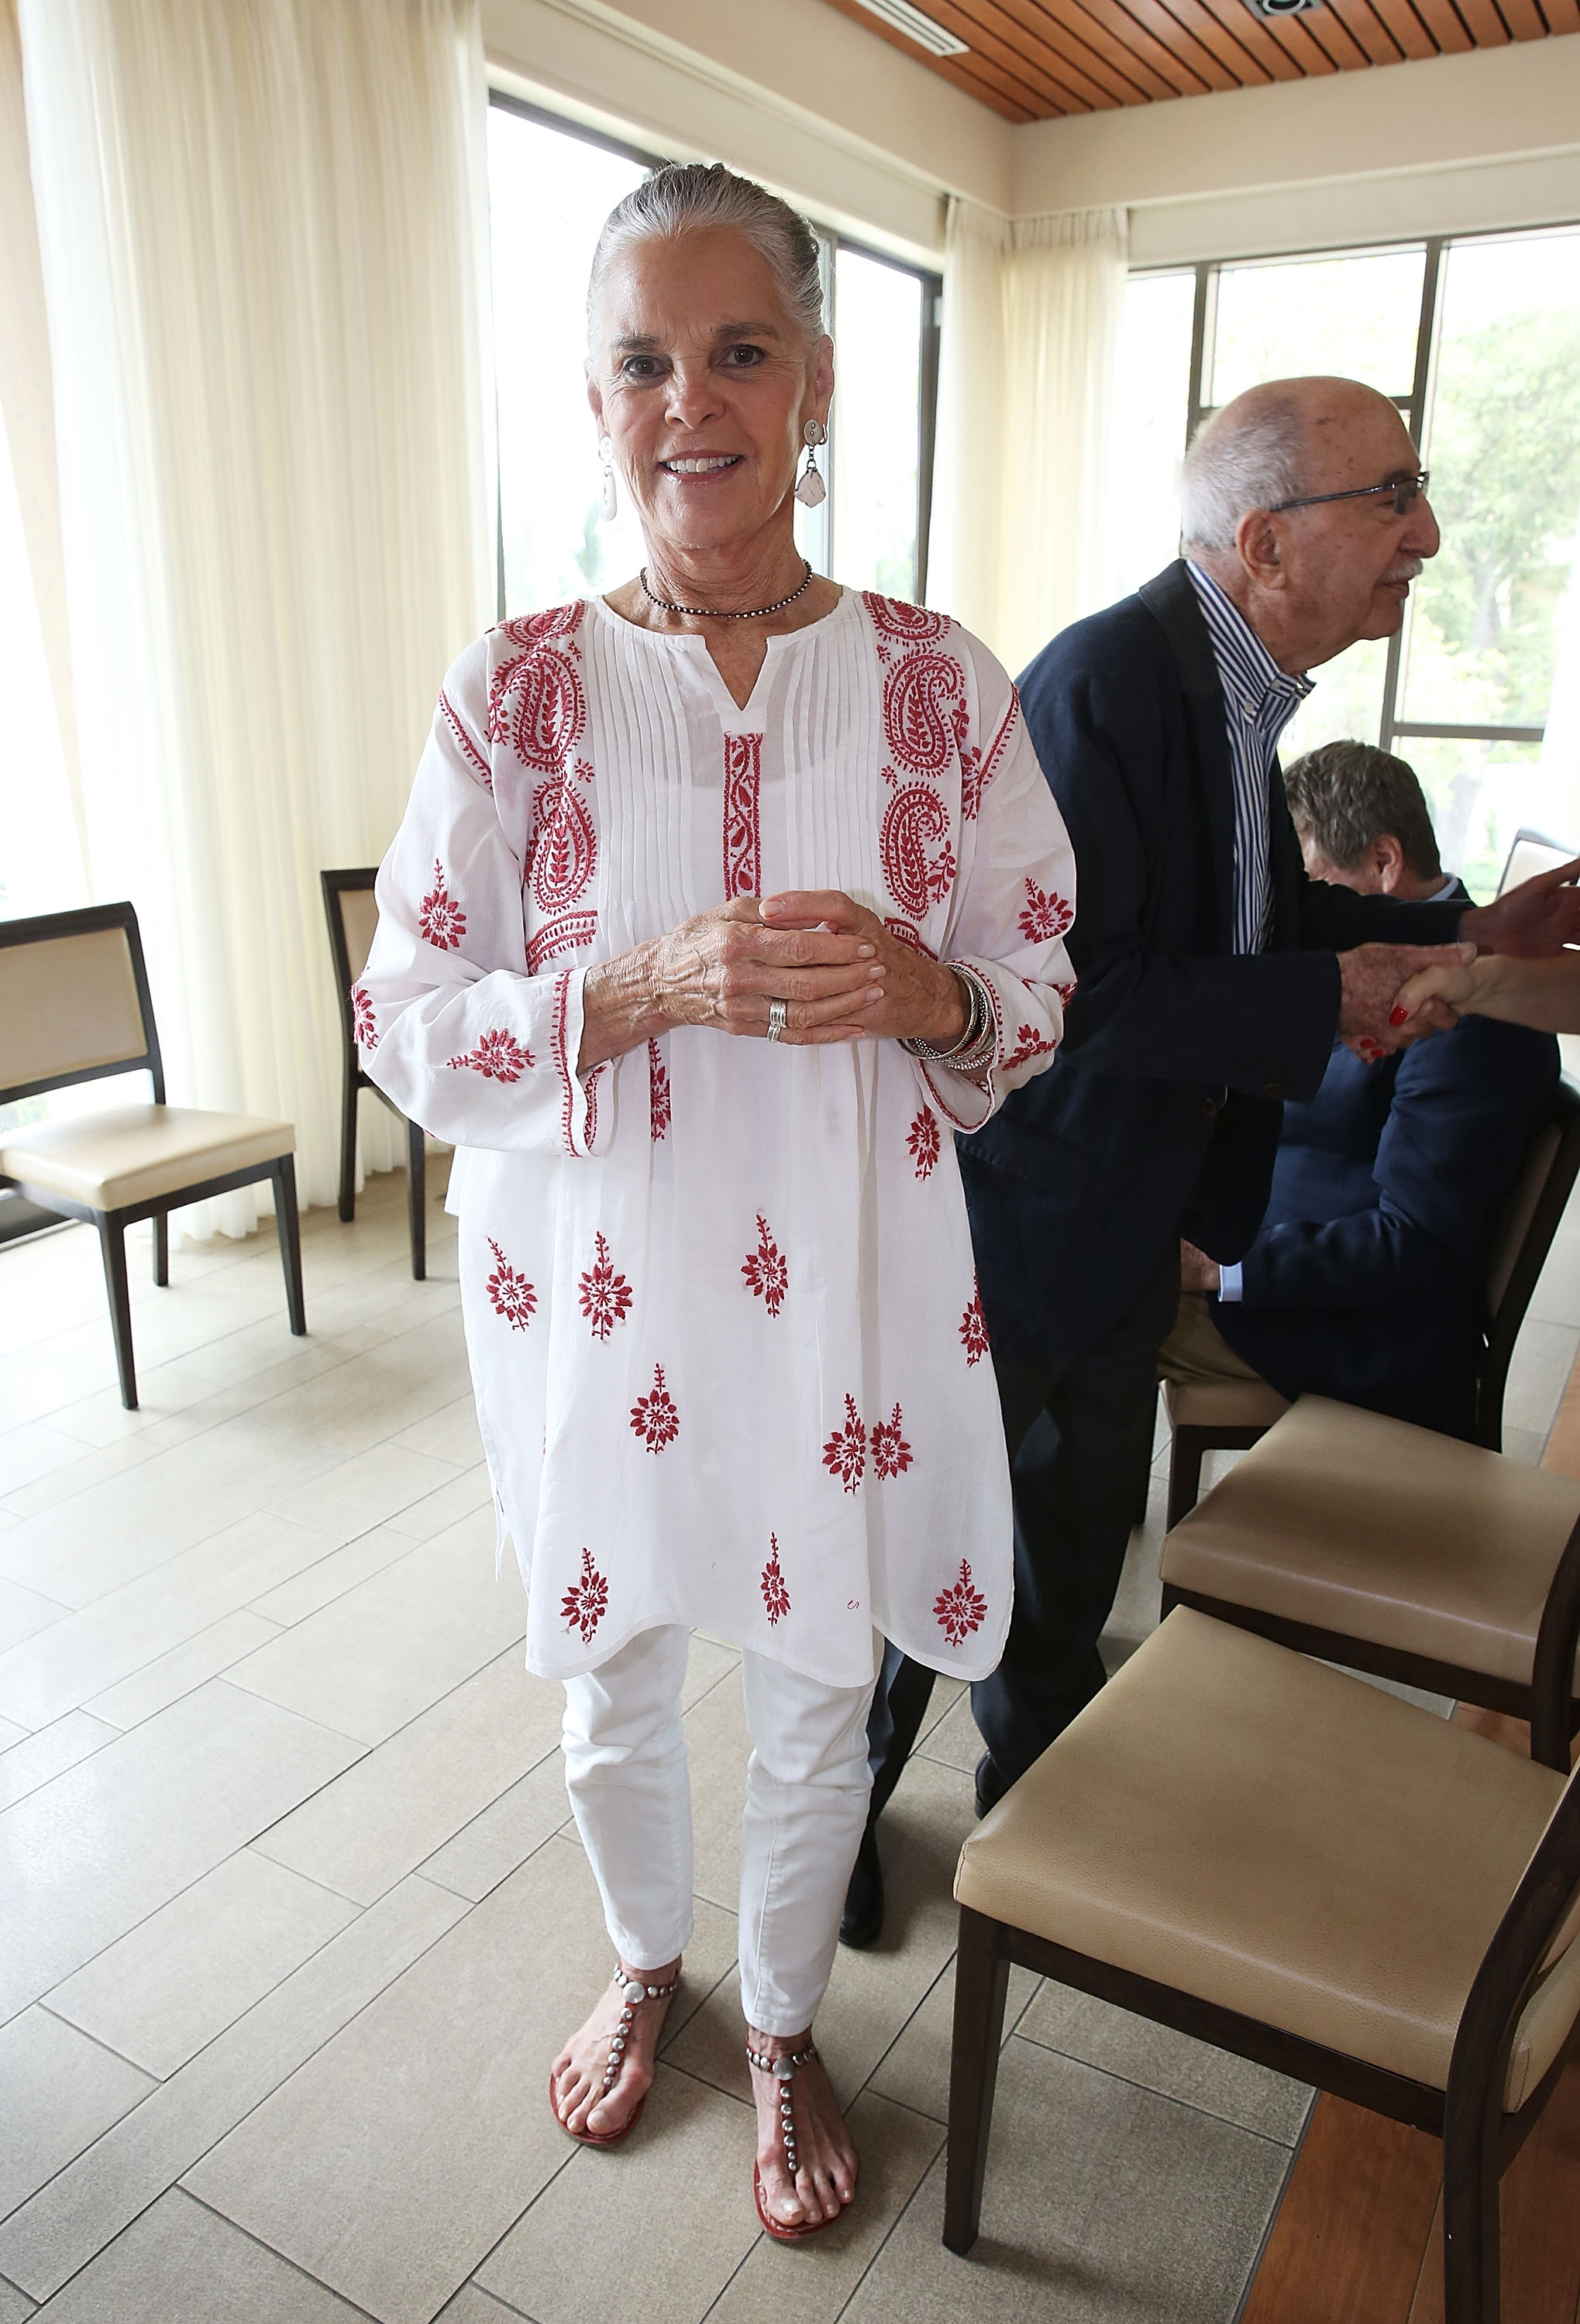 Ali MacGraw during a press conference for "Love Letters at Broward Center For The Performing Arts on July 20, 2015 in Fort Lauderdale, Florid | Source: Getty Images